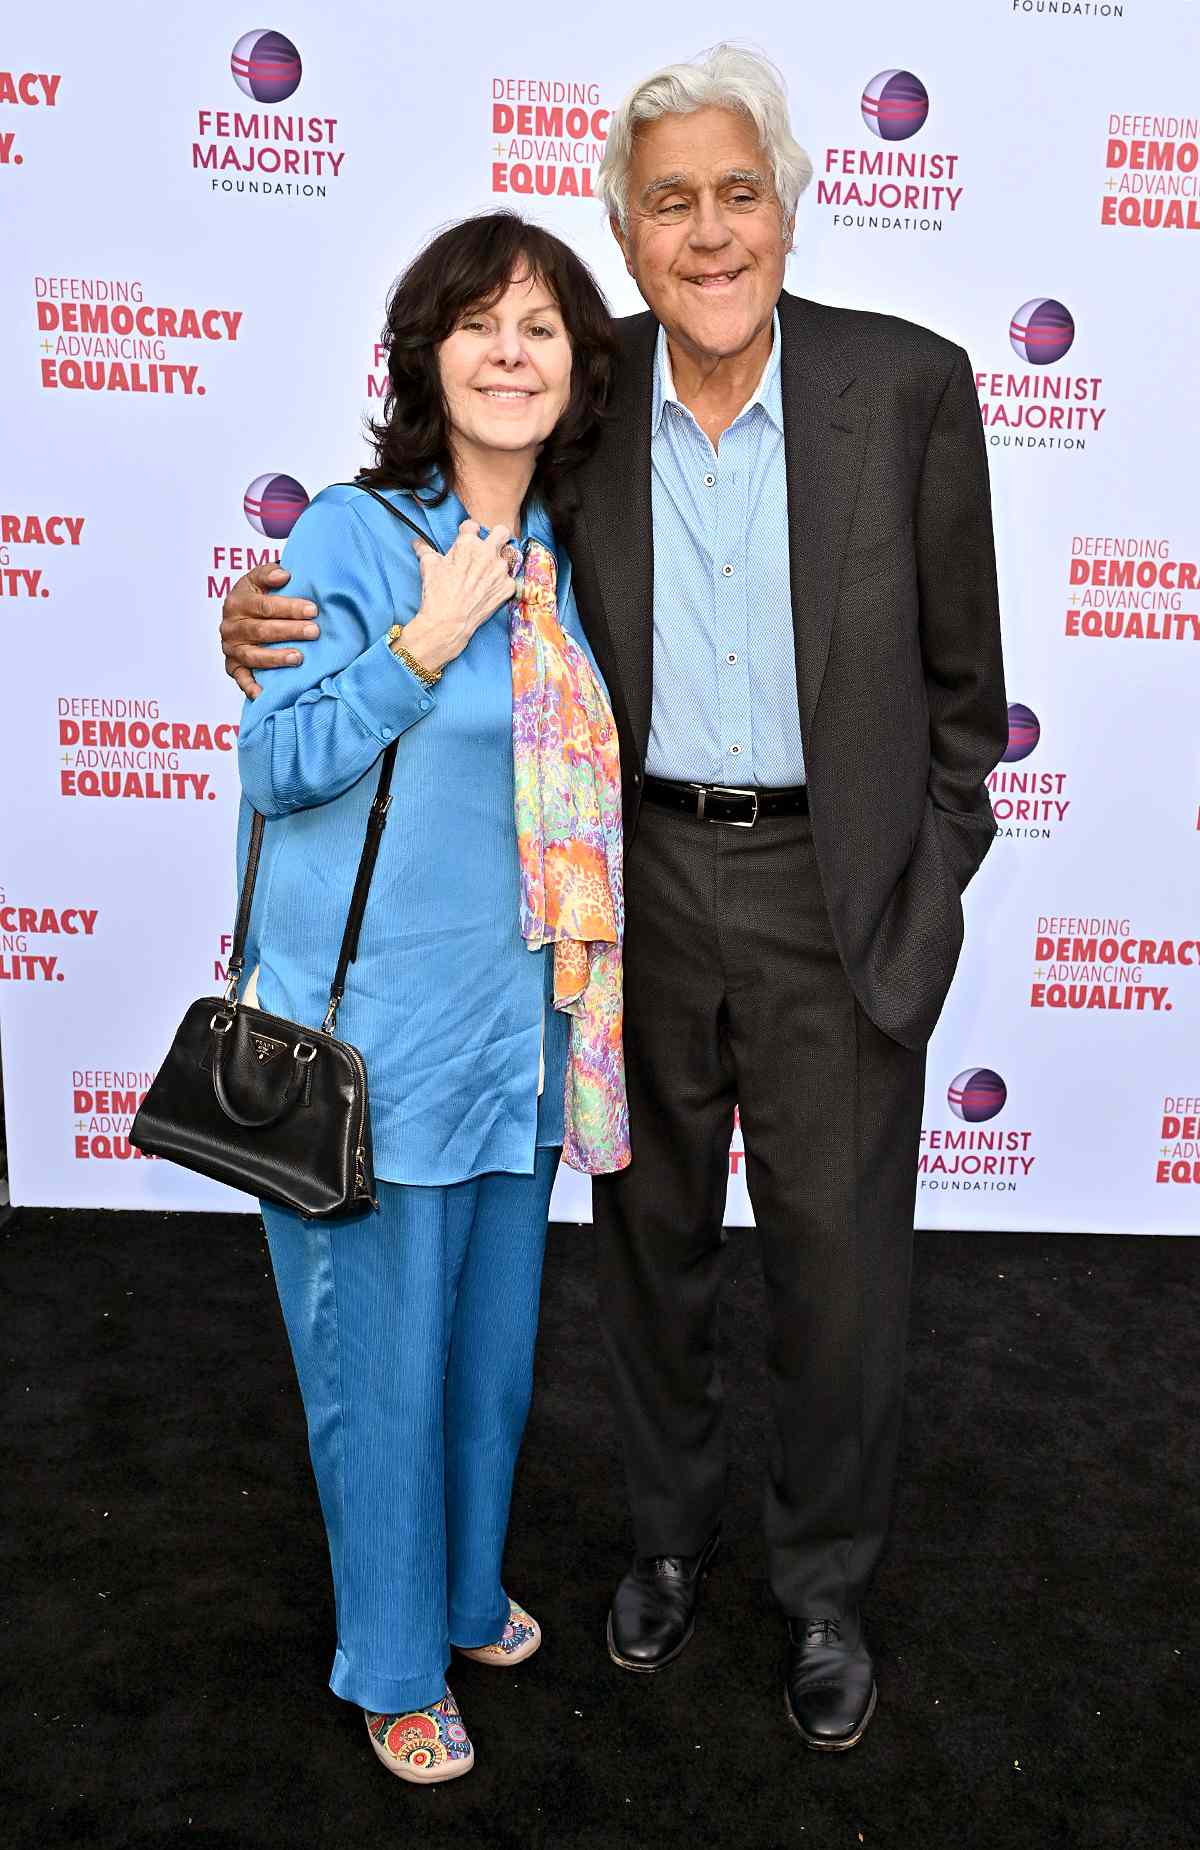 Jay Leno Tears Up as He Speaks About Wife Mavis amid Her Dementia Diagnosis: 'I Couldn't Be Prouder of Her'